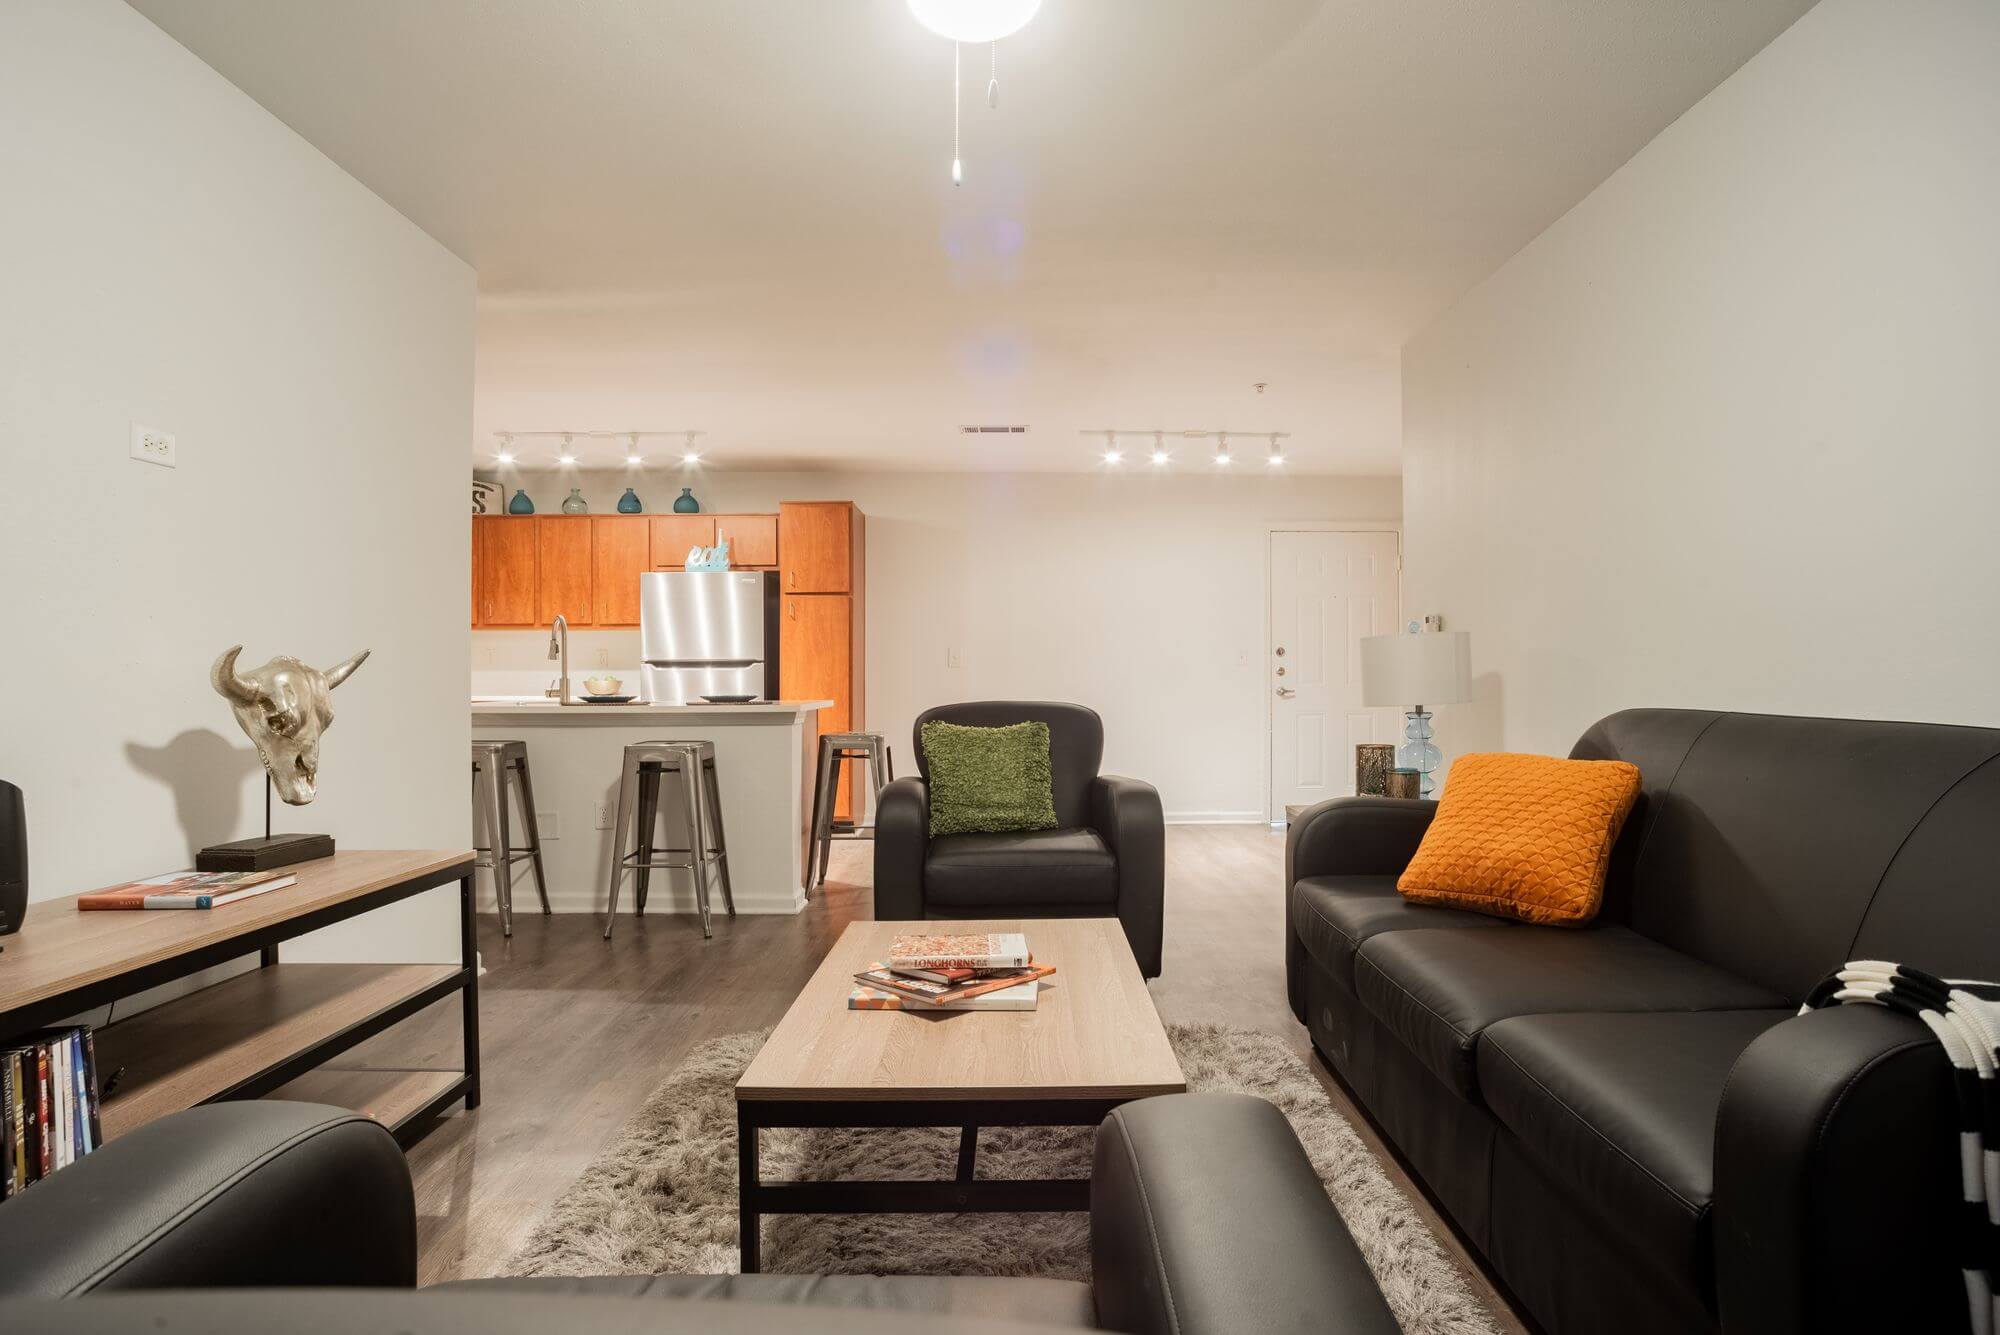 sparq-on-rio-apartments-near-ut-austin-fully-furnished-living-room-and-kitchen